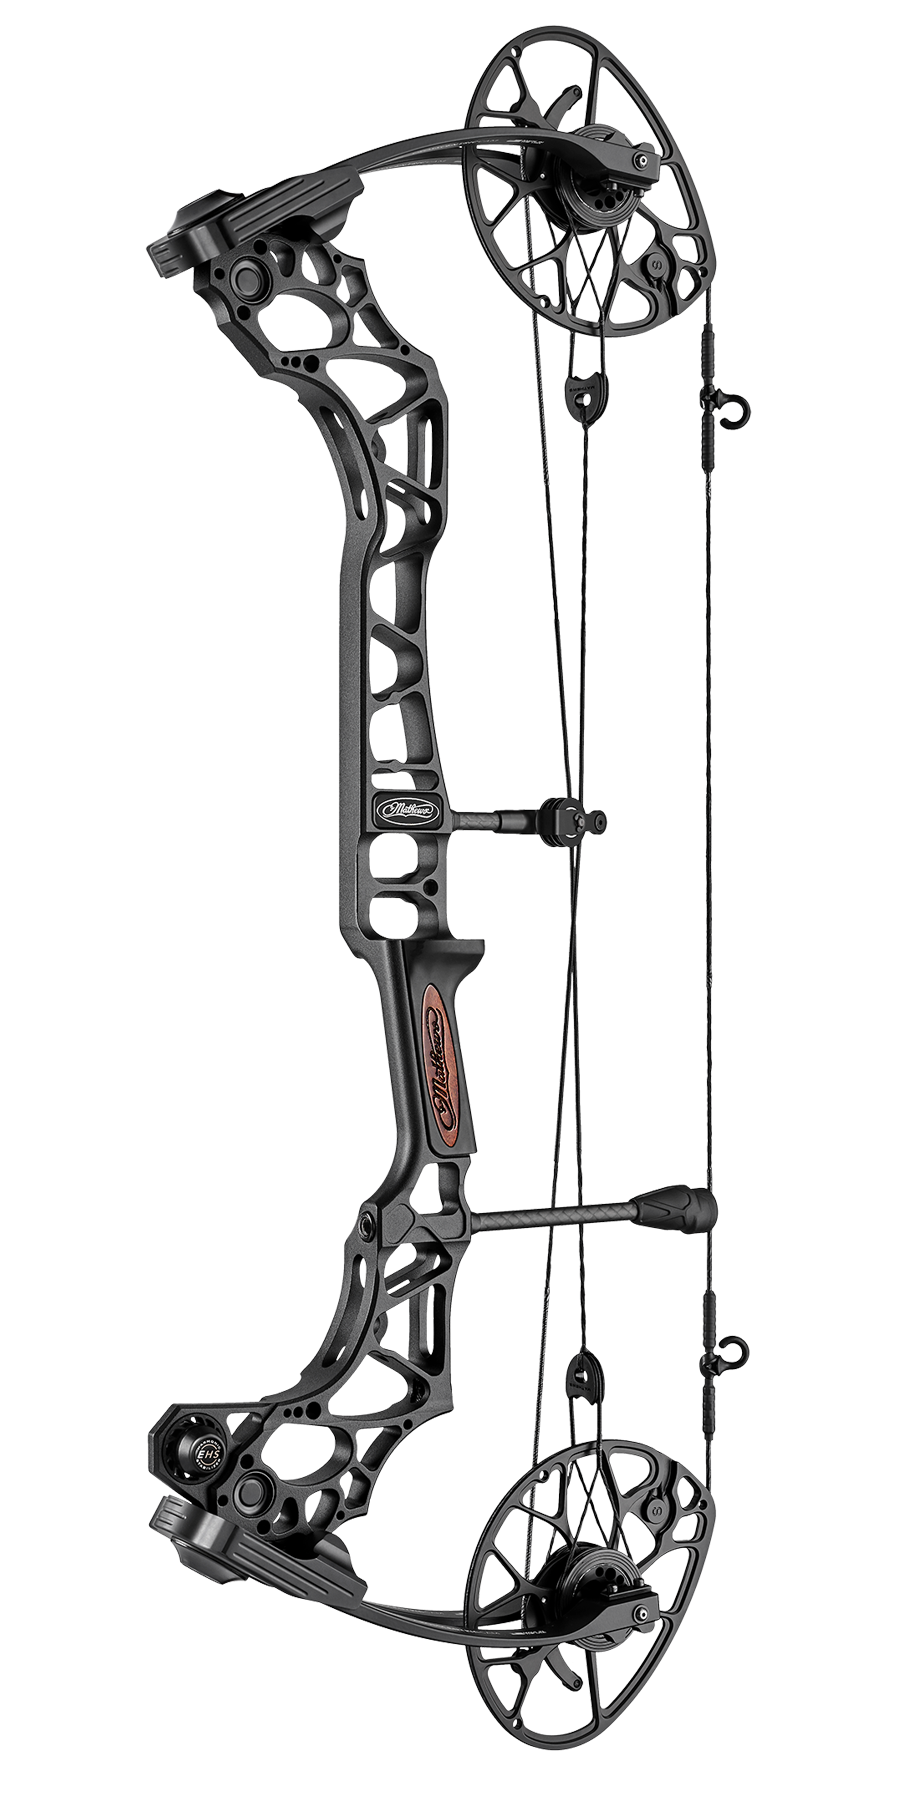 fred bear compound bow serial number lookup